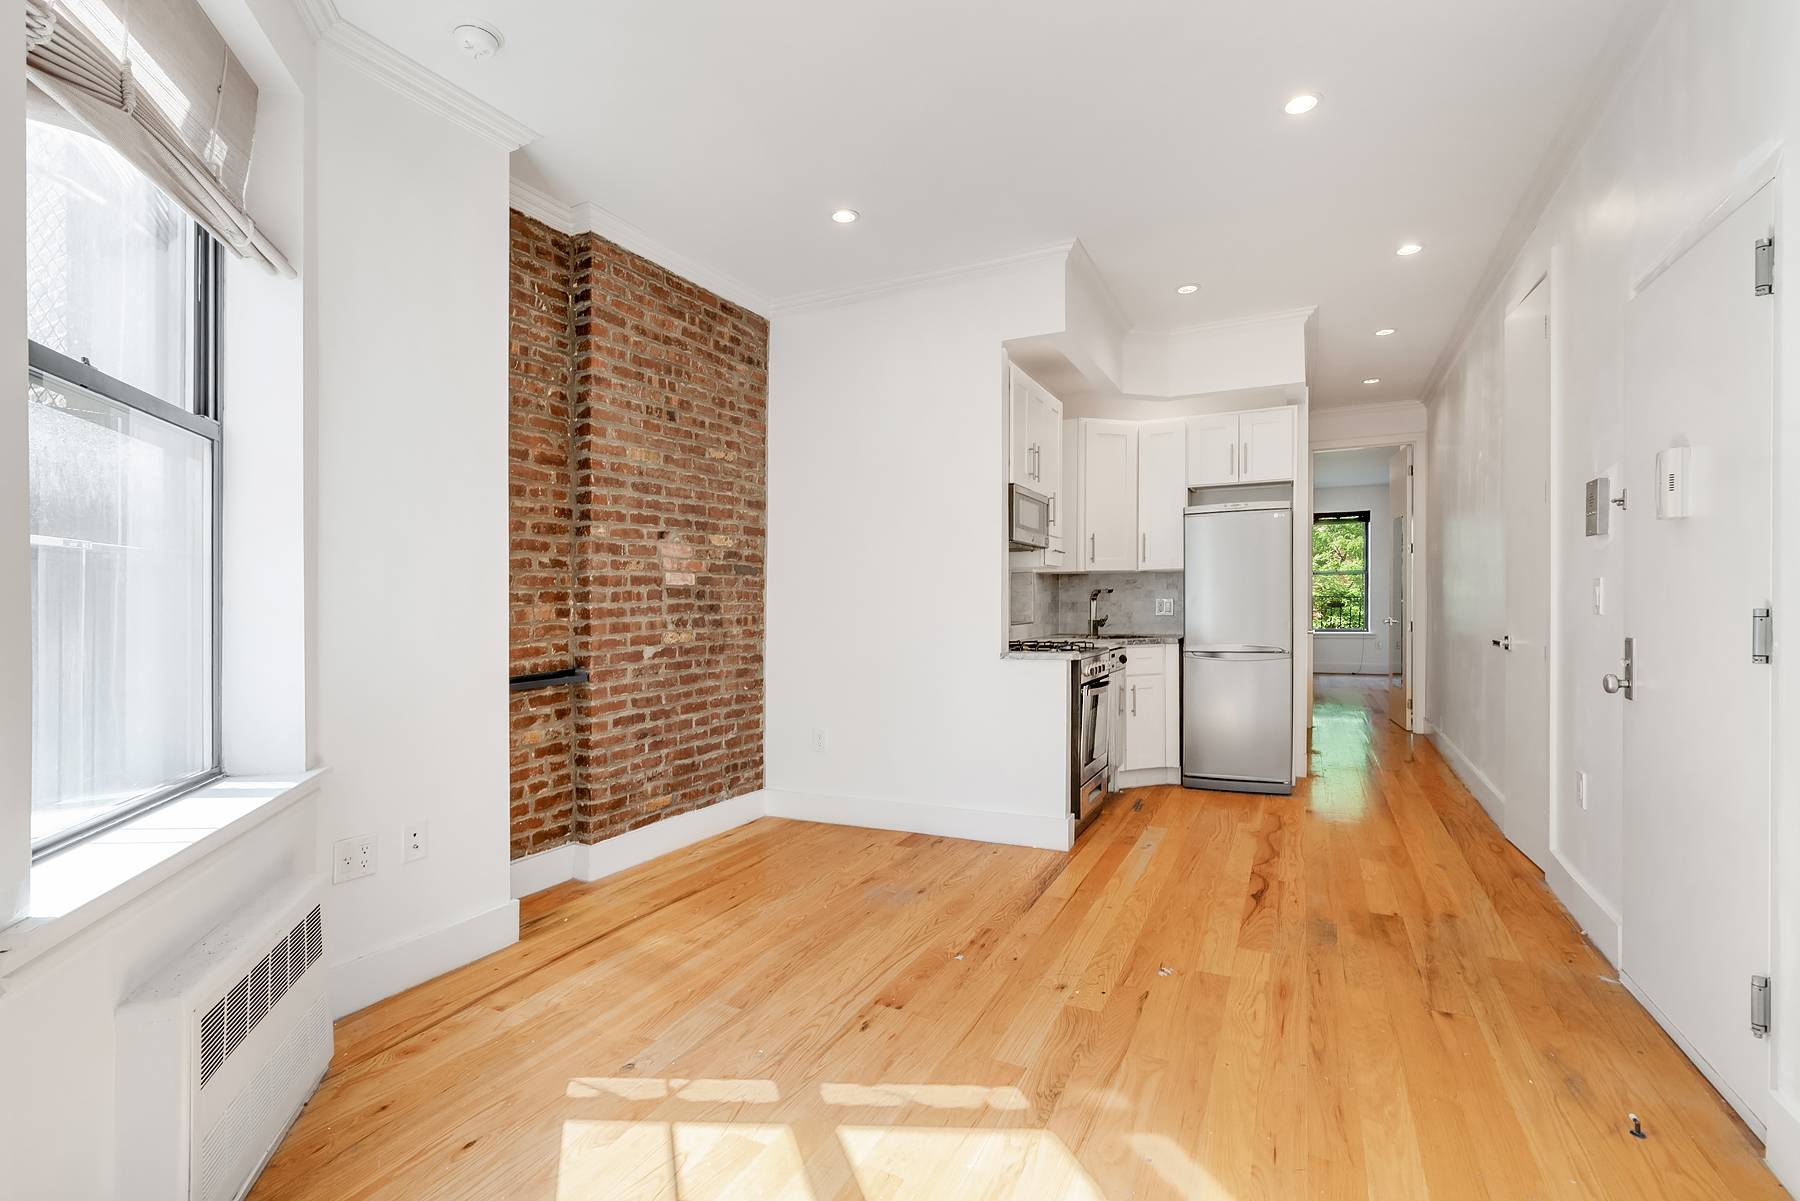 SHOWINGS START FRIDAY APRIL 29TH Luminous two bedroom apartment in the heart of Greenwich Village.